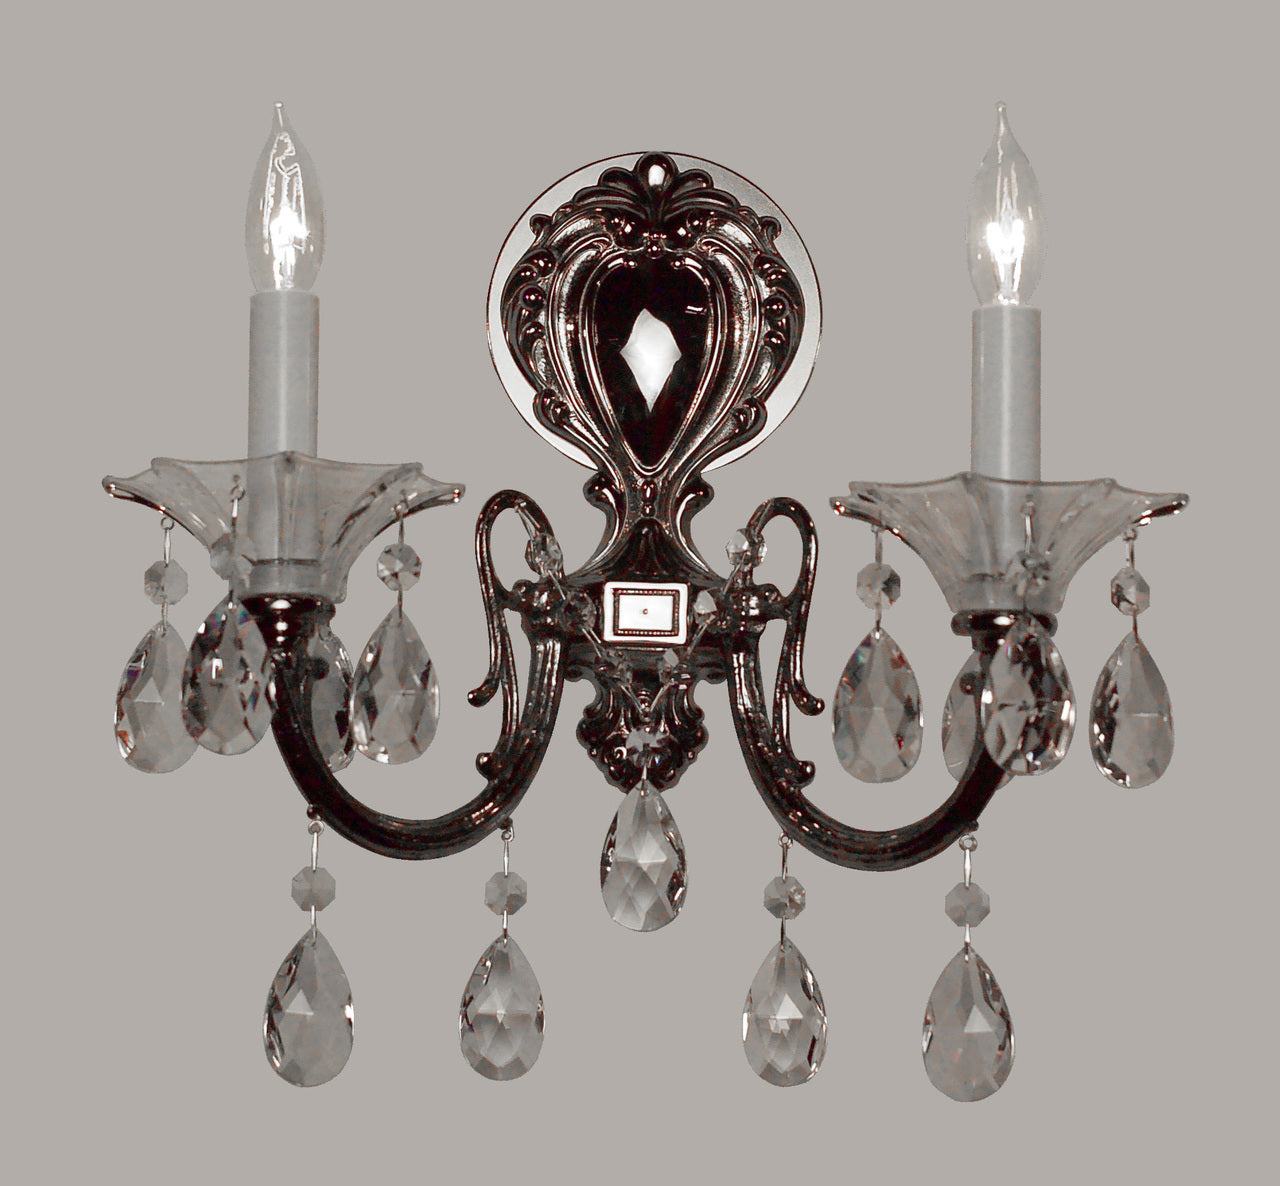 Classic Lighting 57052 CHP SC Via Lombardi Crystal Wall Sconce in Champagne Pearl (Imported from Spain)